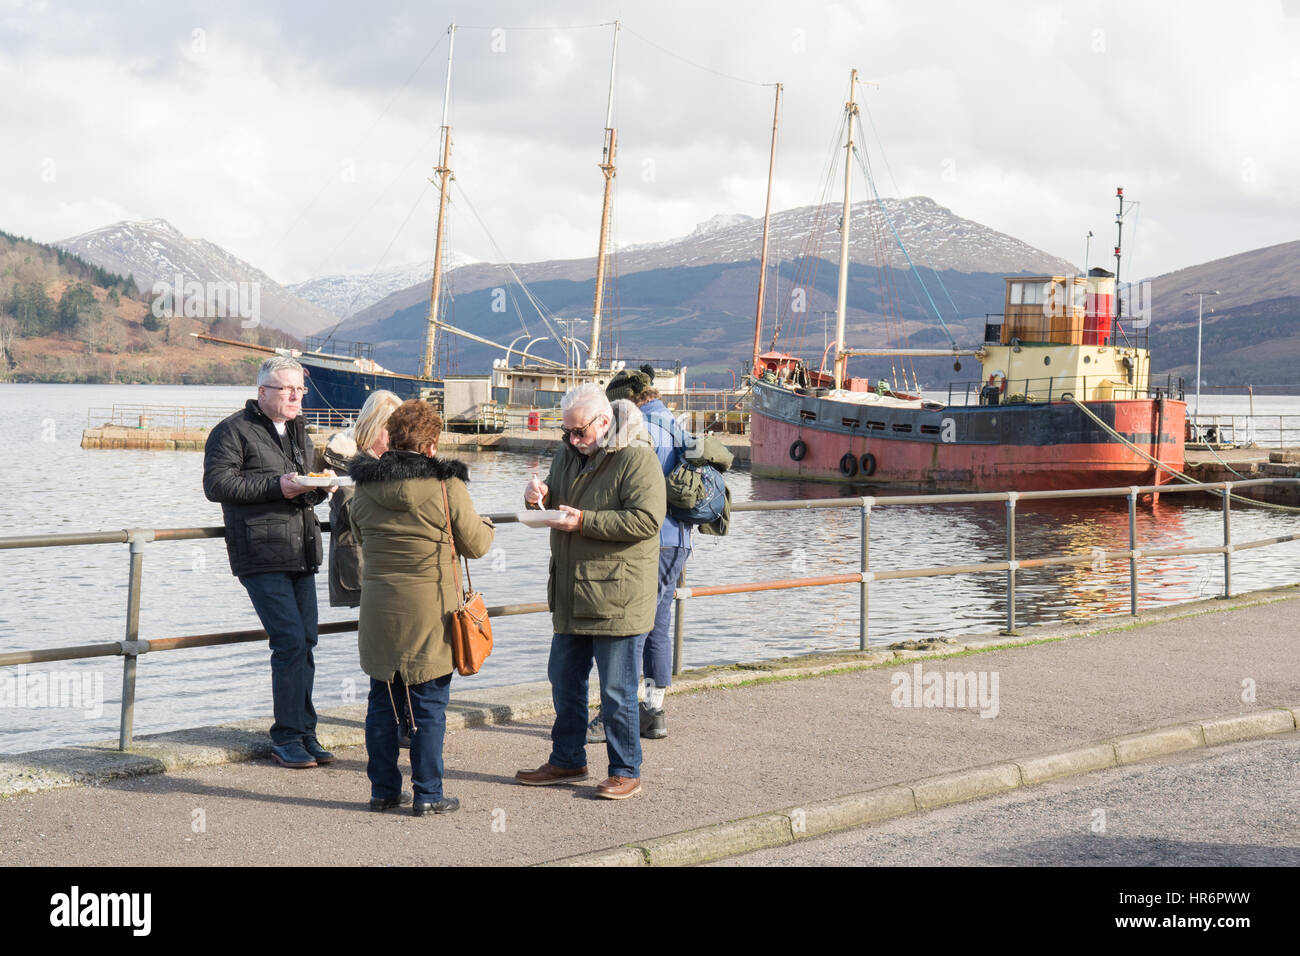 Inveraray, Argyll and Bute, Scotland, UK. 27th Feb, 2017. UK weather - eating traditional fish and chip suppers by Inveraray Harbour on a still bright day overlooking Loch Fyne Credit: Kay Roxby/Alamy Live News Stock Photo